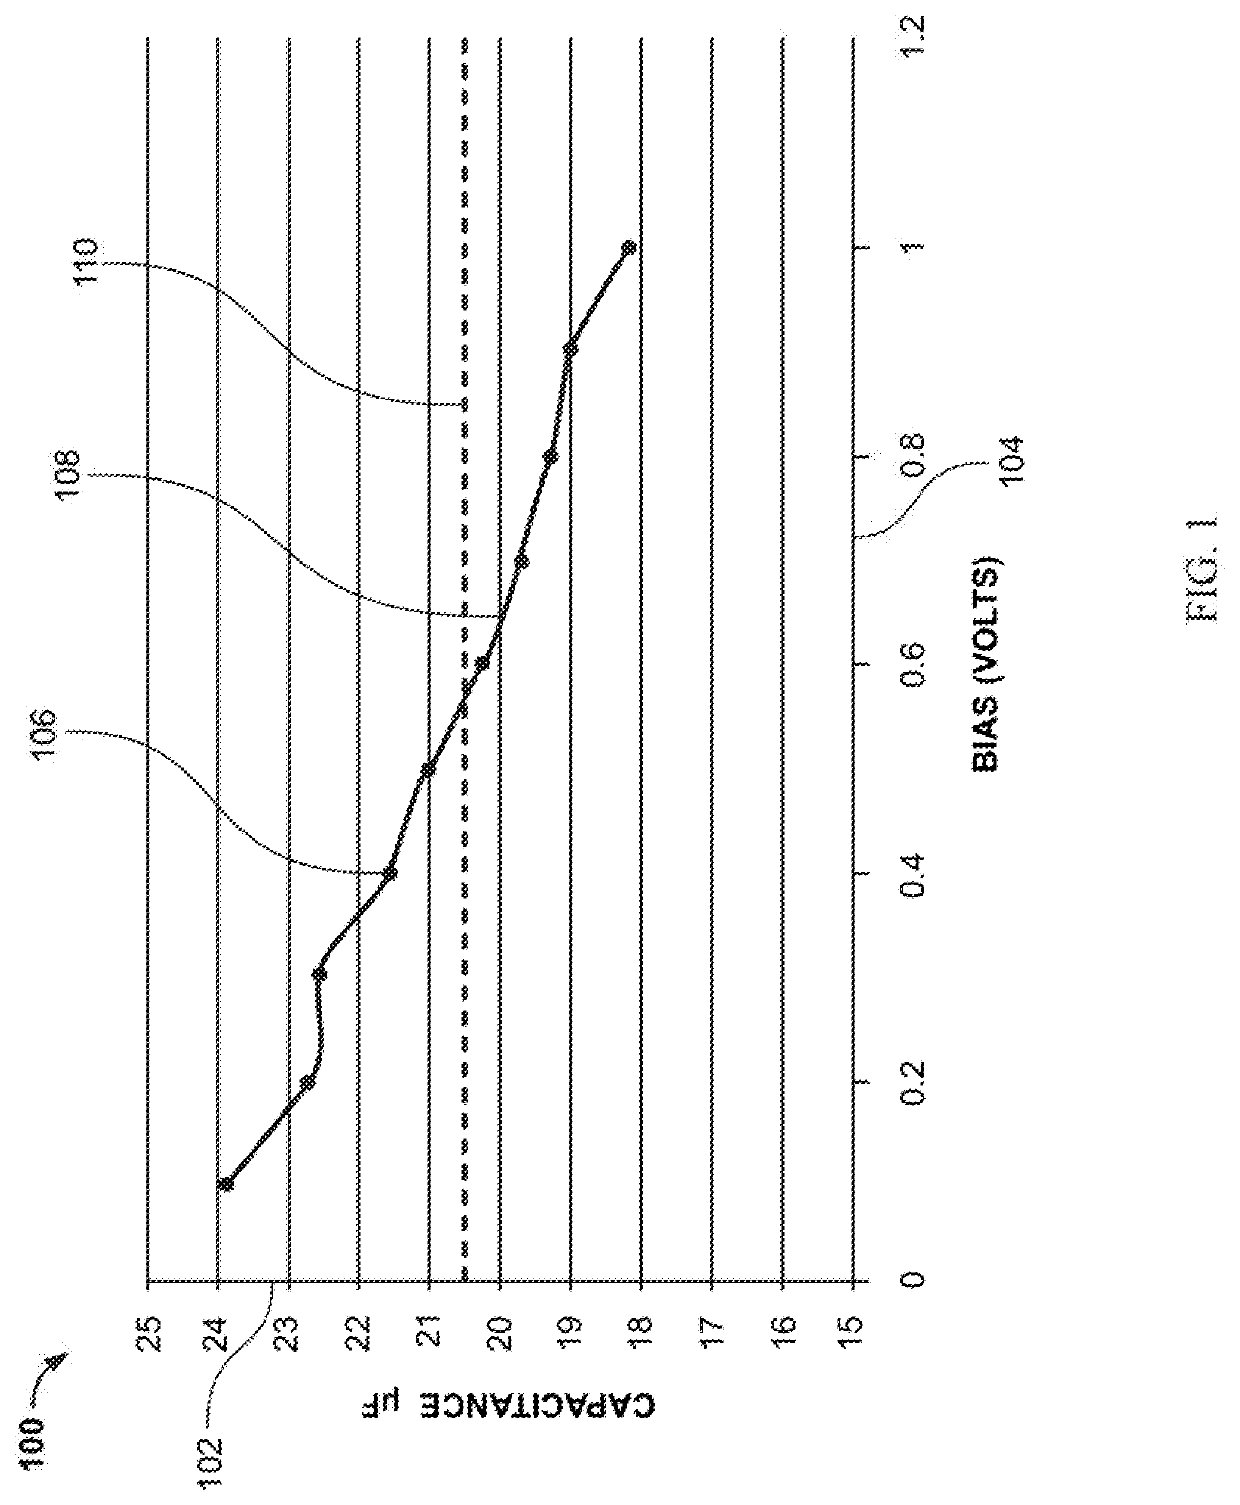 Sensor for measurement of electrostatic potential without current loading and without mechanical chopping